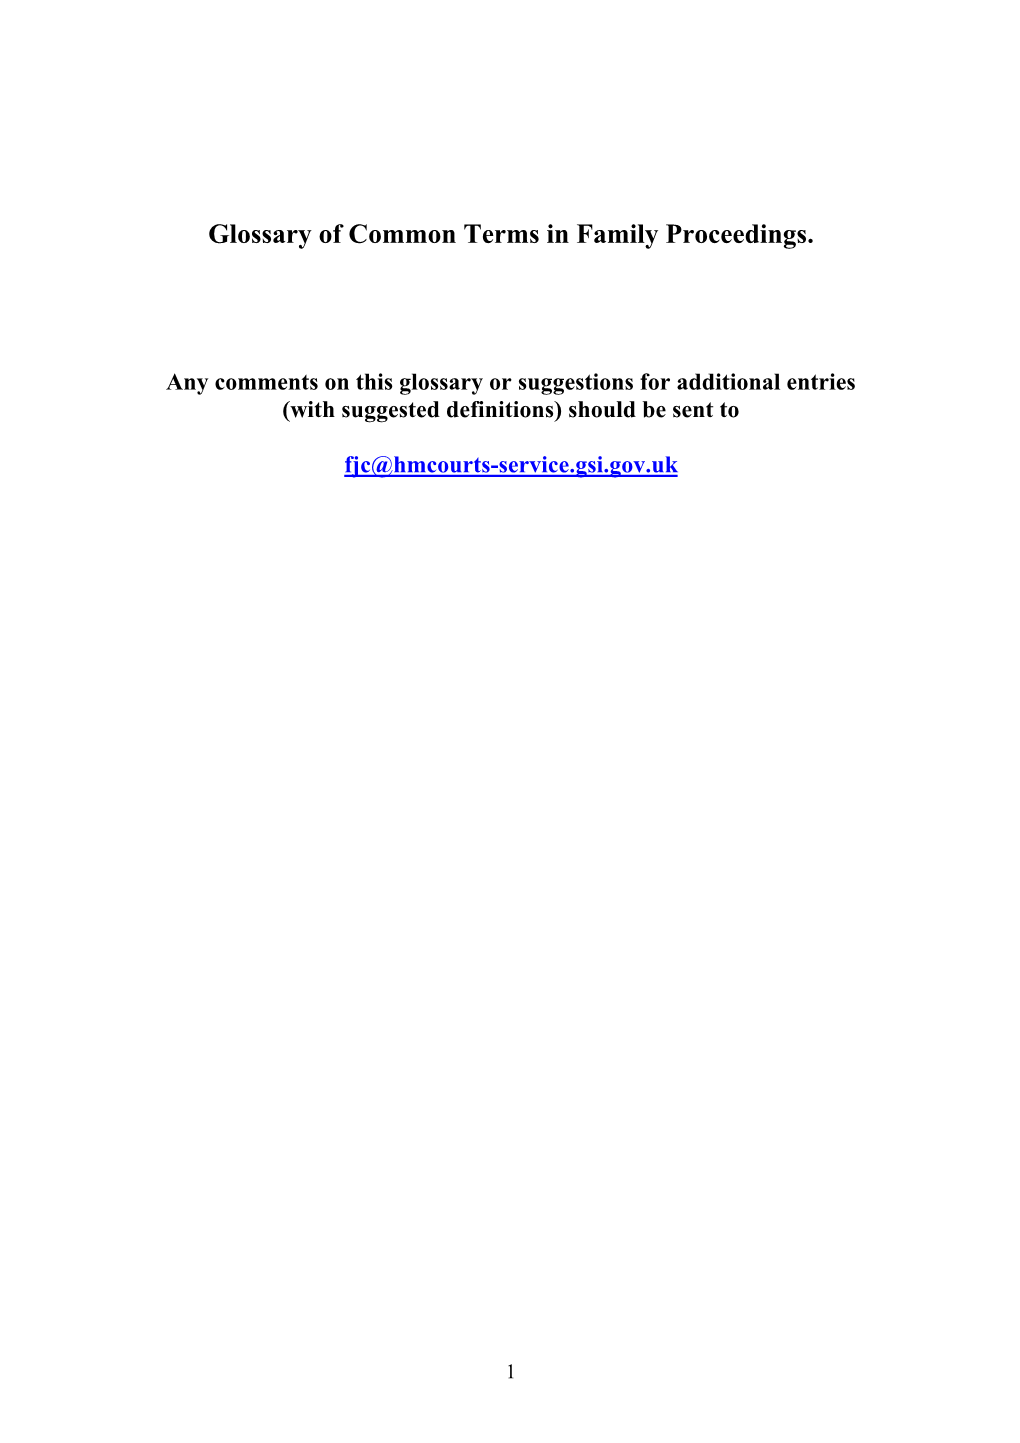 Glossary of Terms in Family Proceedings